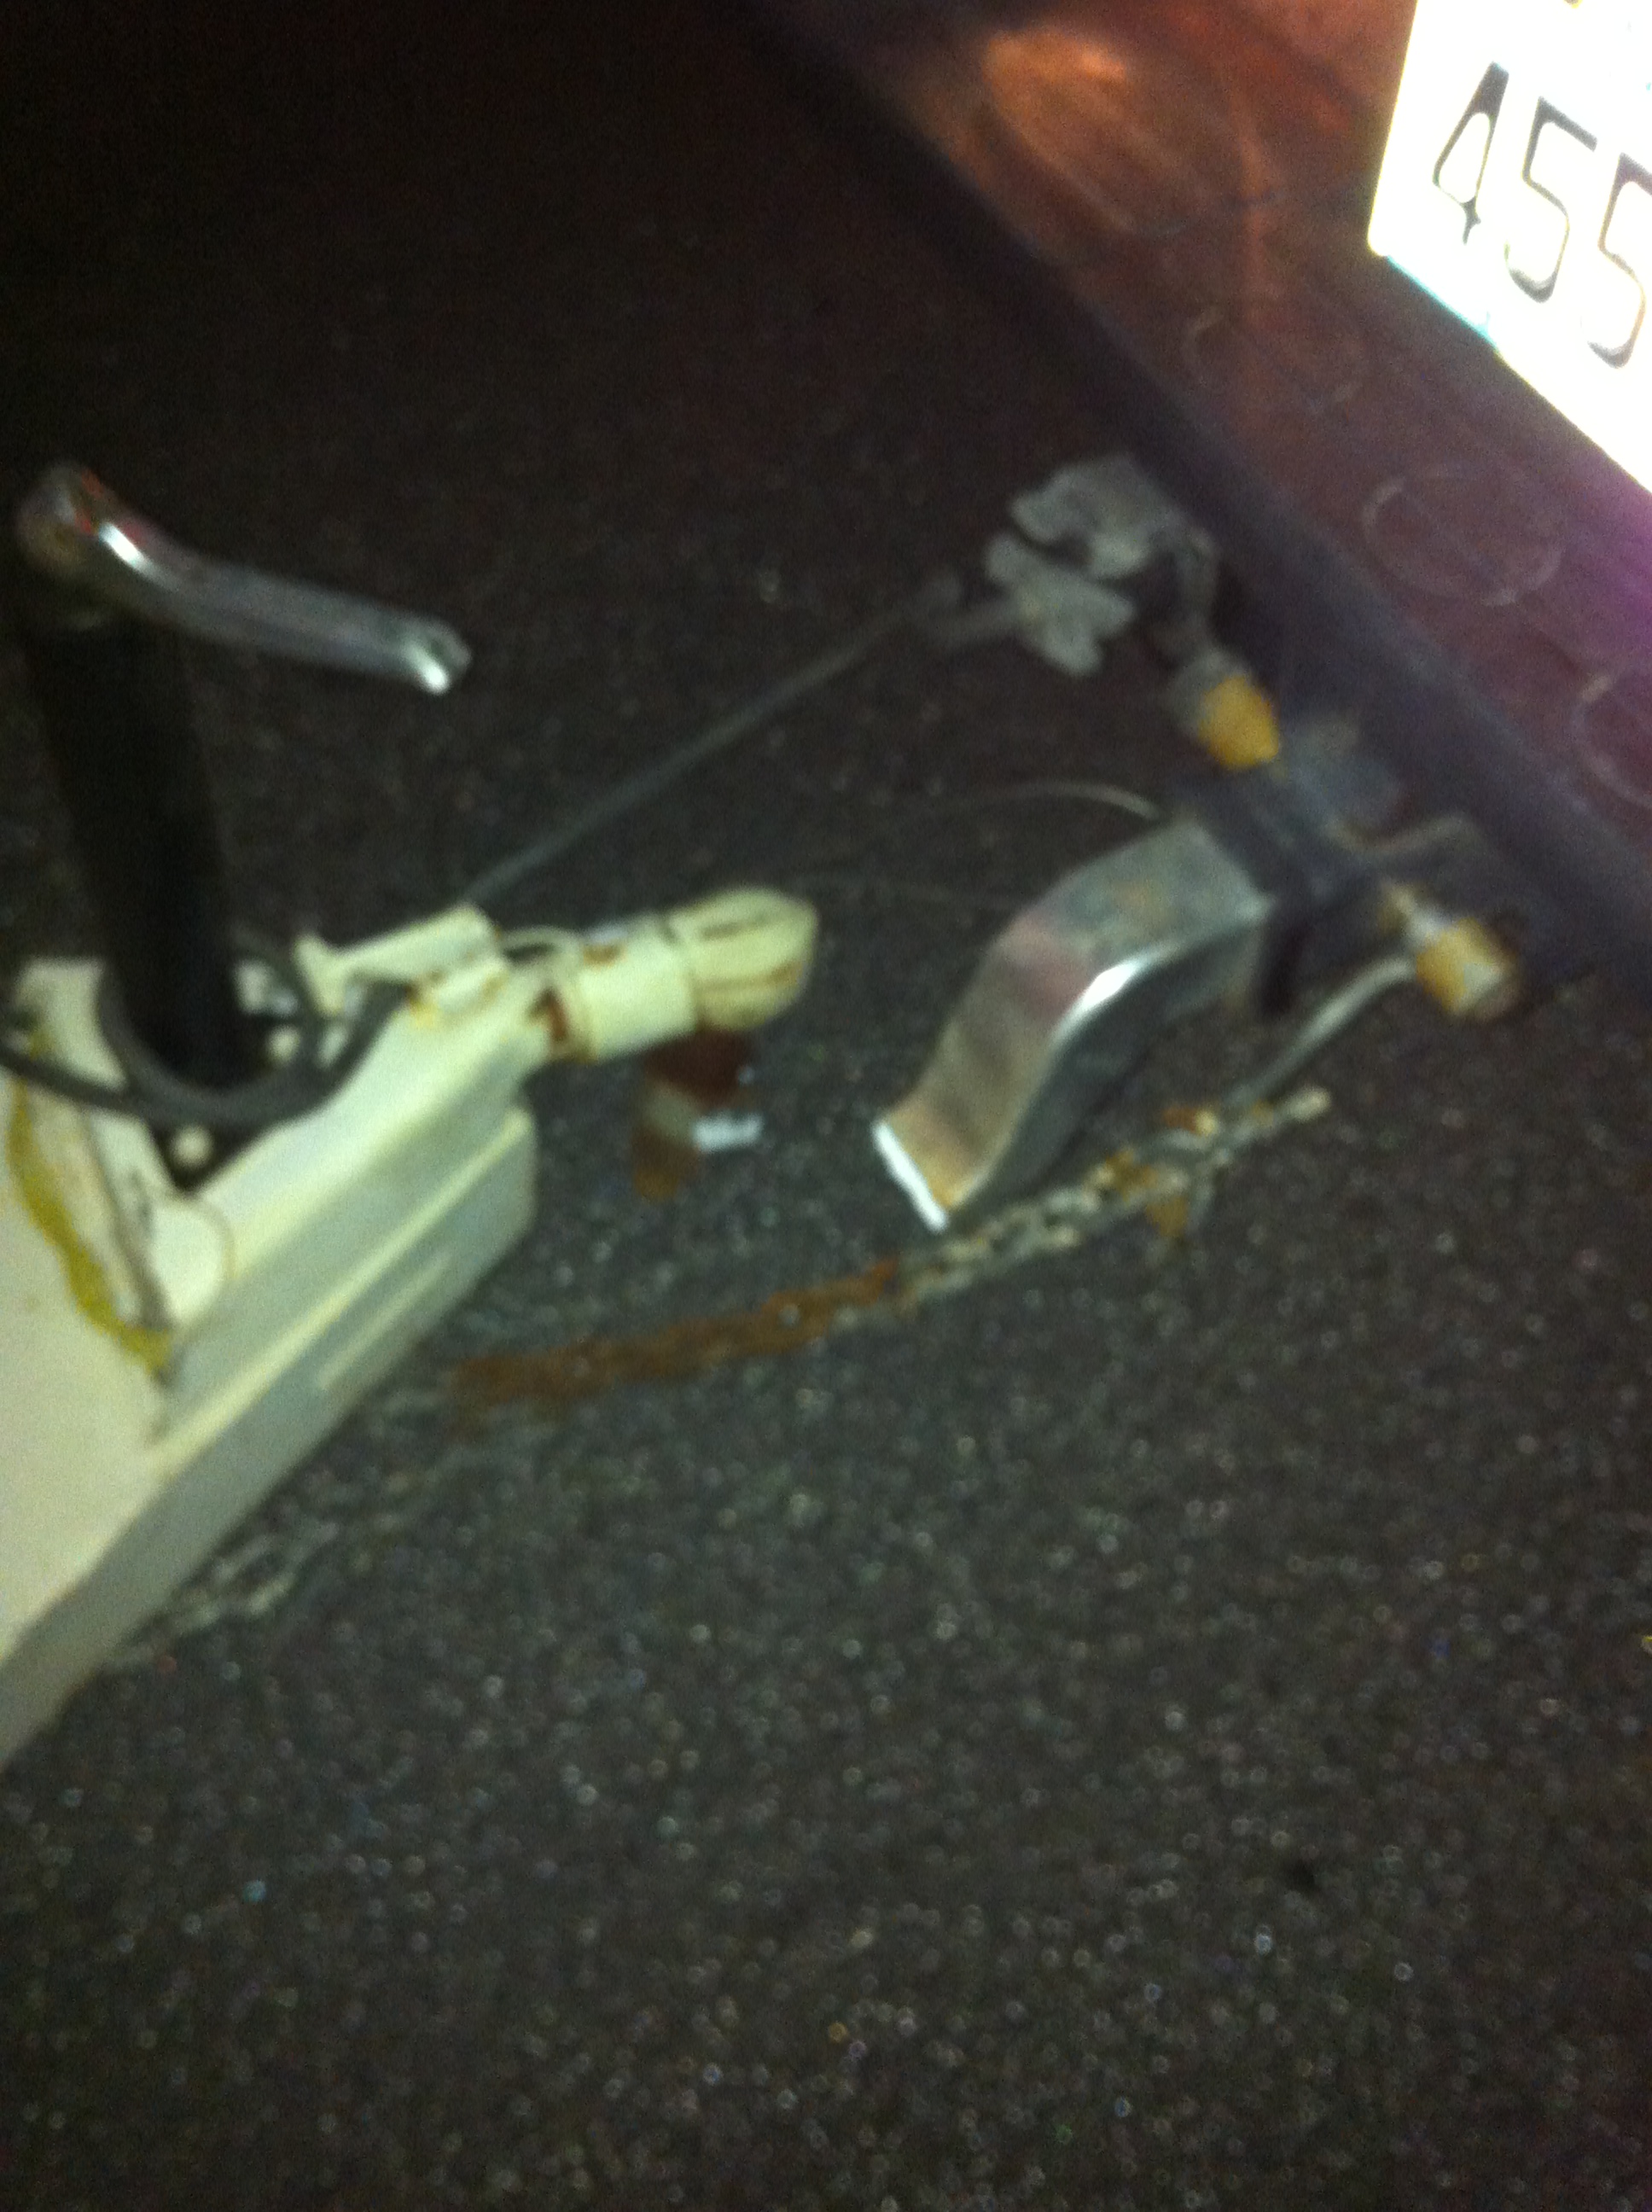 Photo of the broken hitch at the incident scene